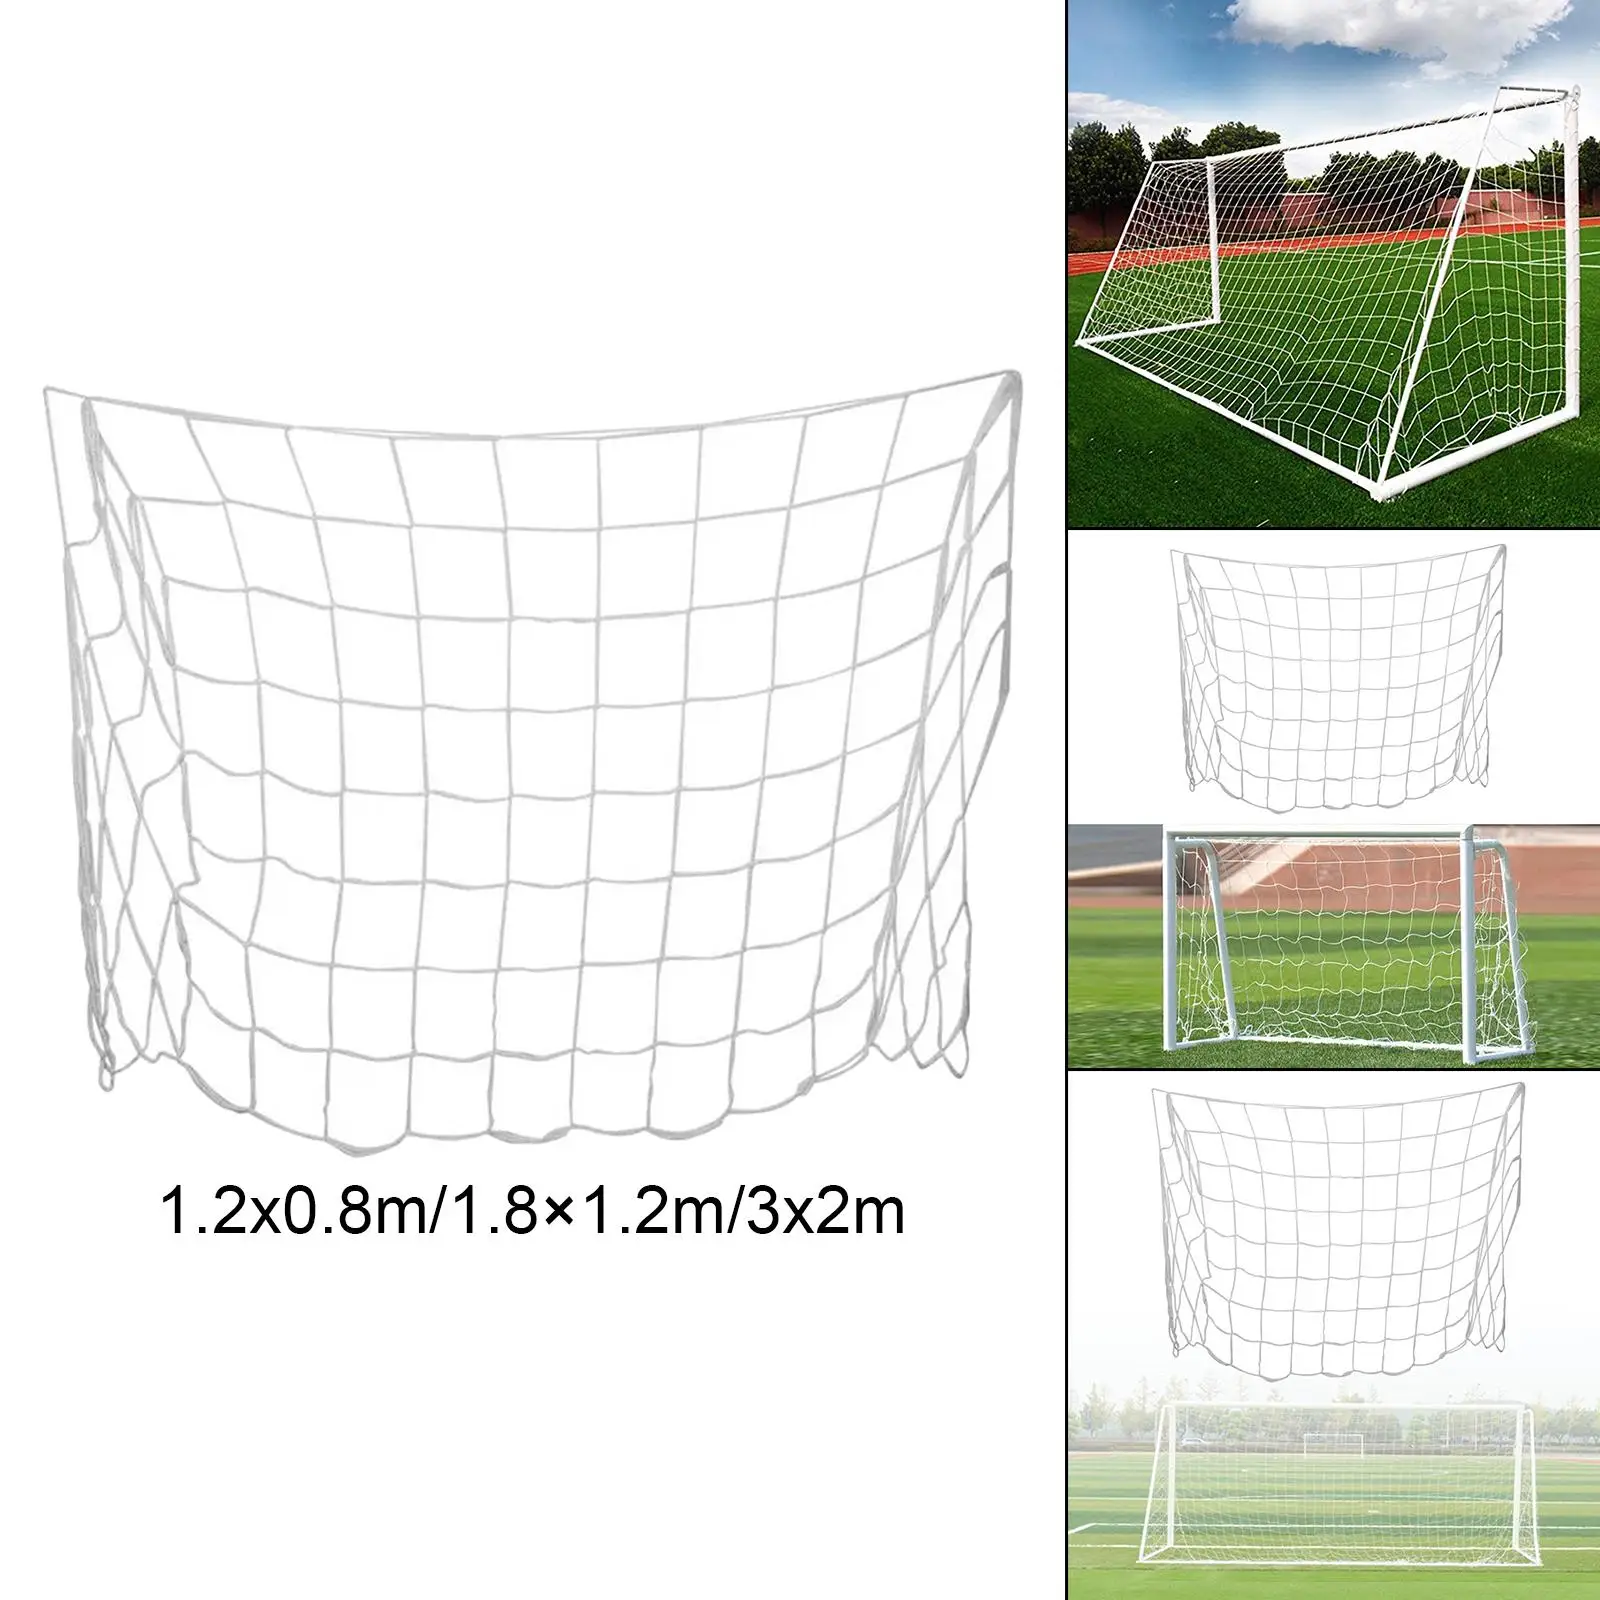 Portable Soccer Goal Net Replacement Accessories Polyethylene Soccer